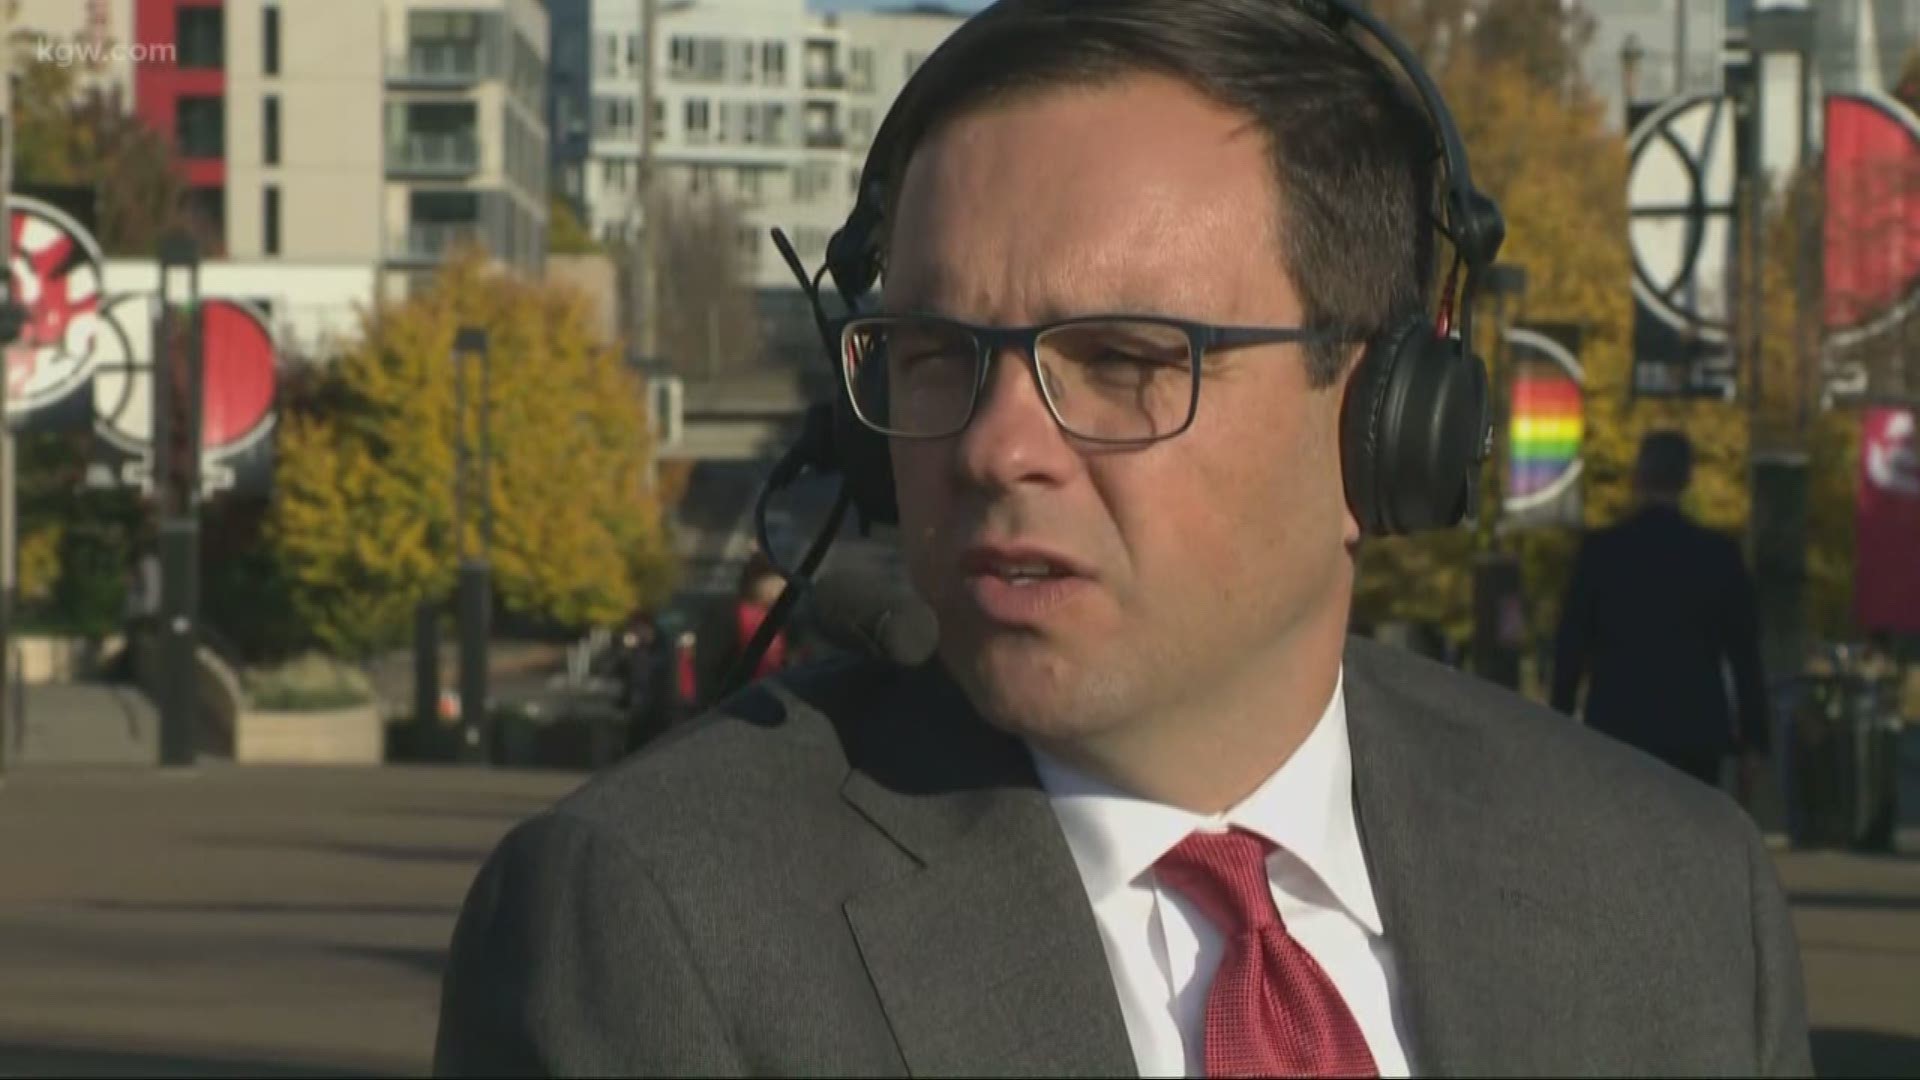 Portland Trail Blazers president Chris McGowan speaks to KGW about the 50th anniversary season, opening the season at home, and more.